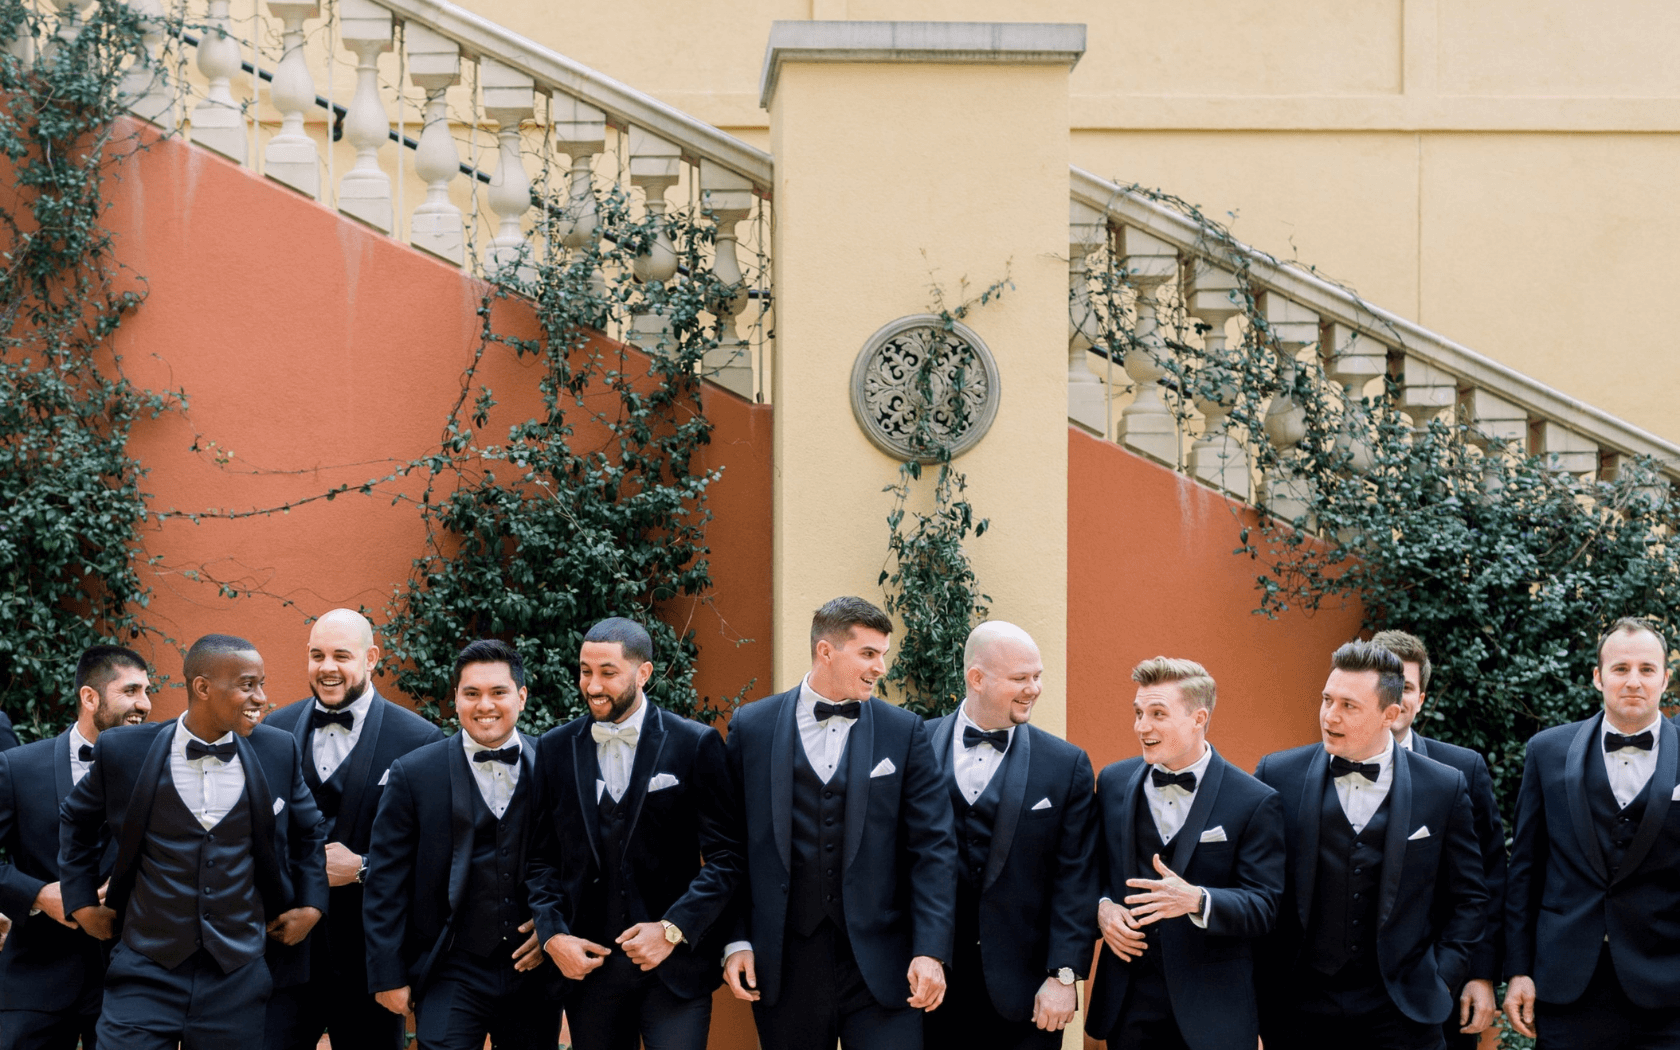 groomsmen lined up in tuxedos in front of staircase in courtyard